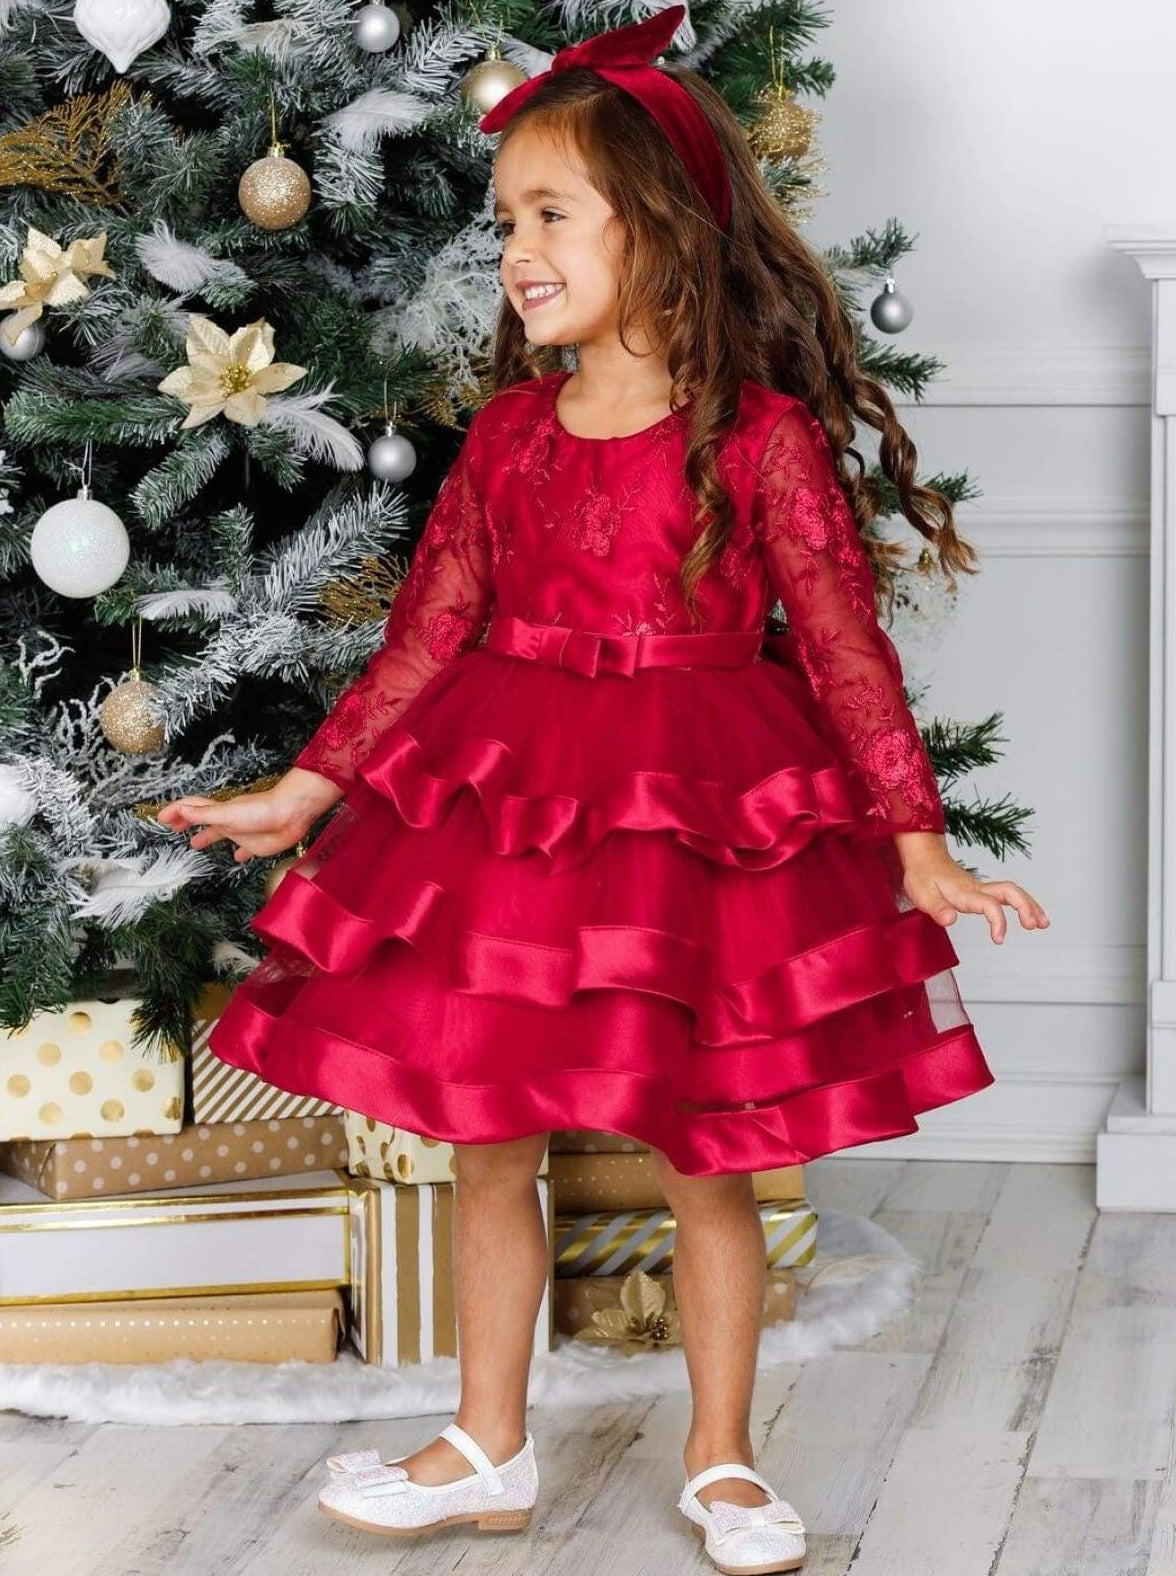 Winter Formal Wear | Long Sleeve Tiered Lace Princess Holiday Dress